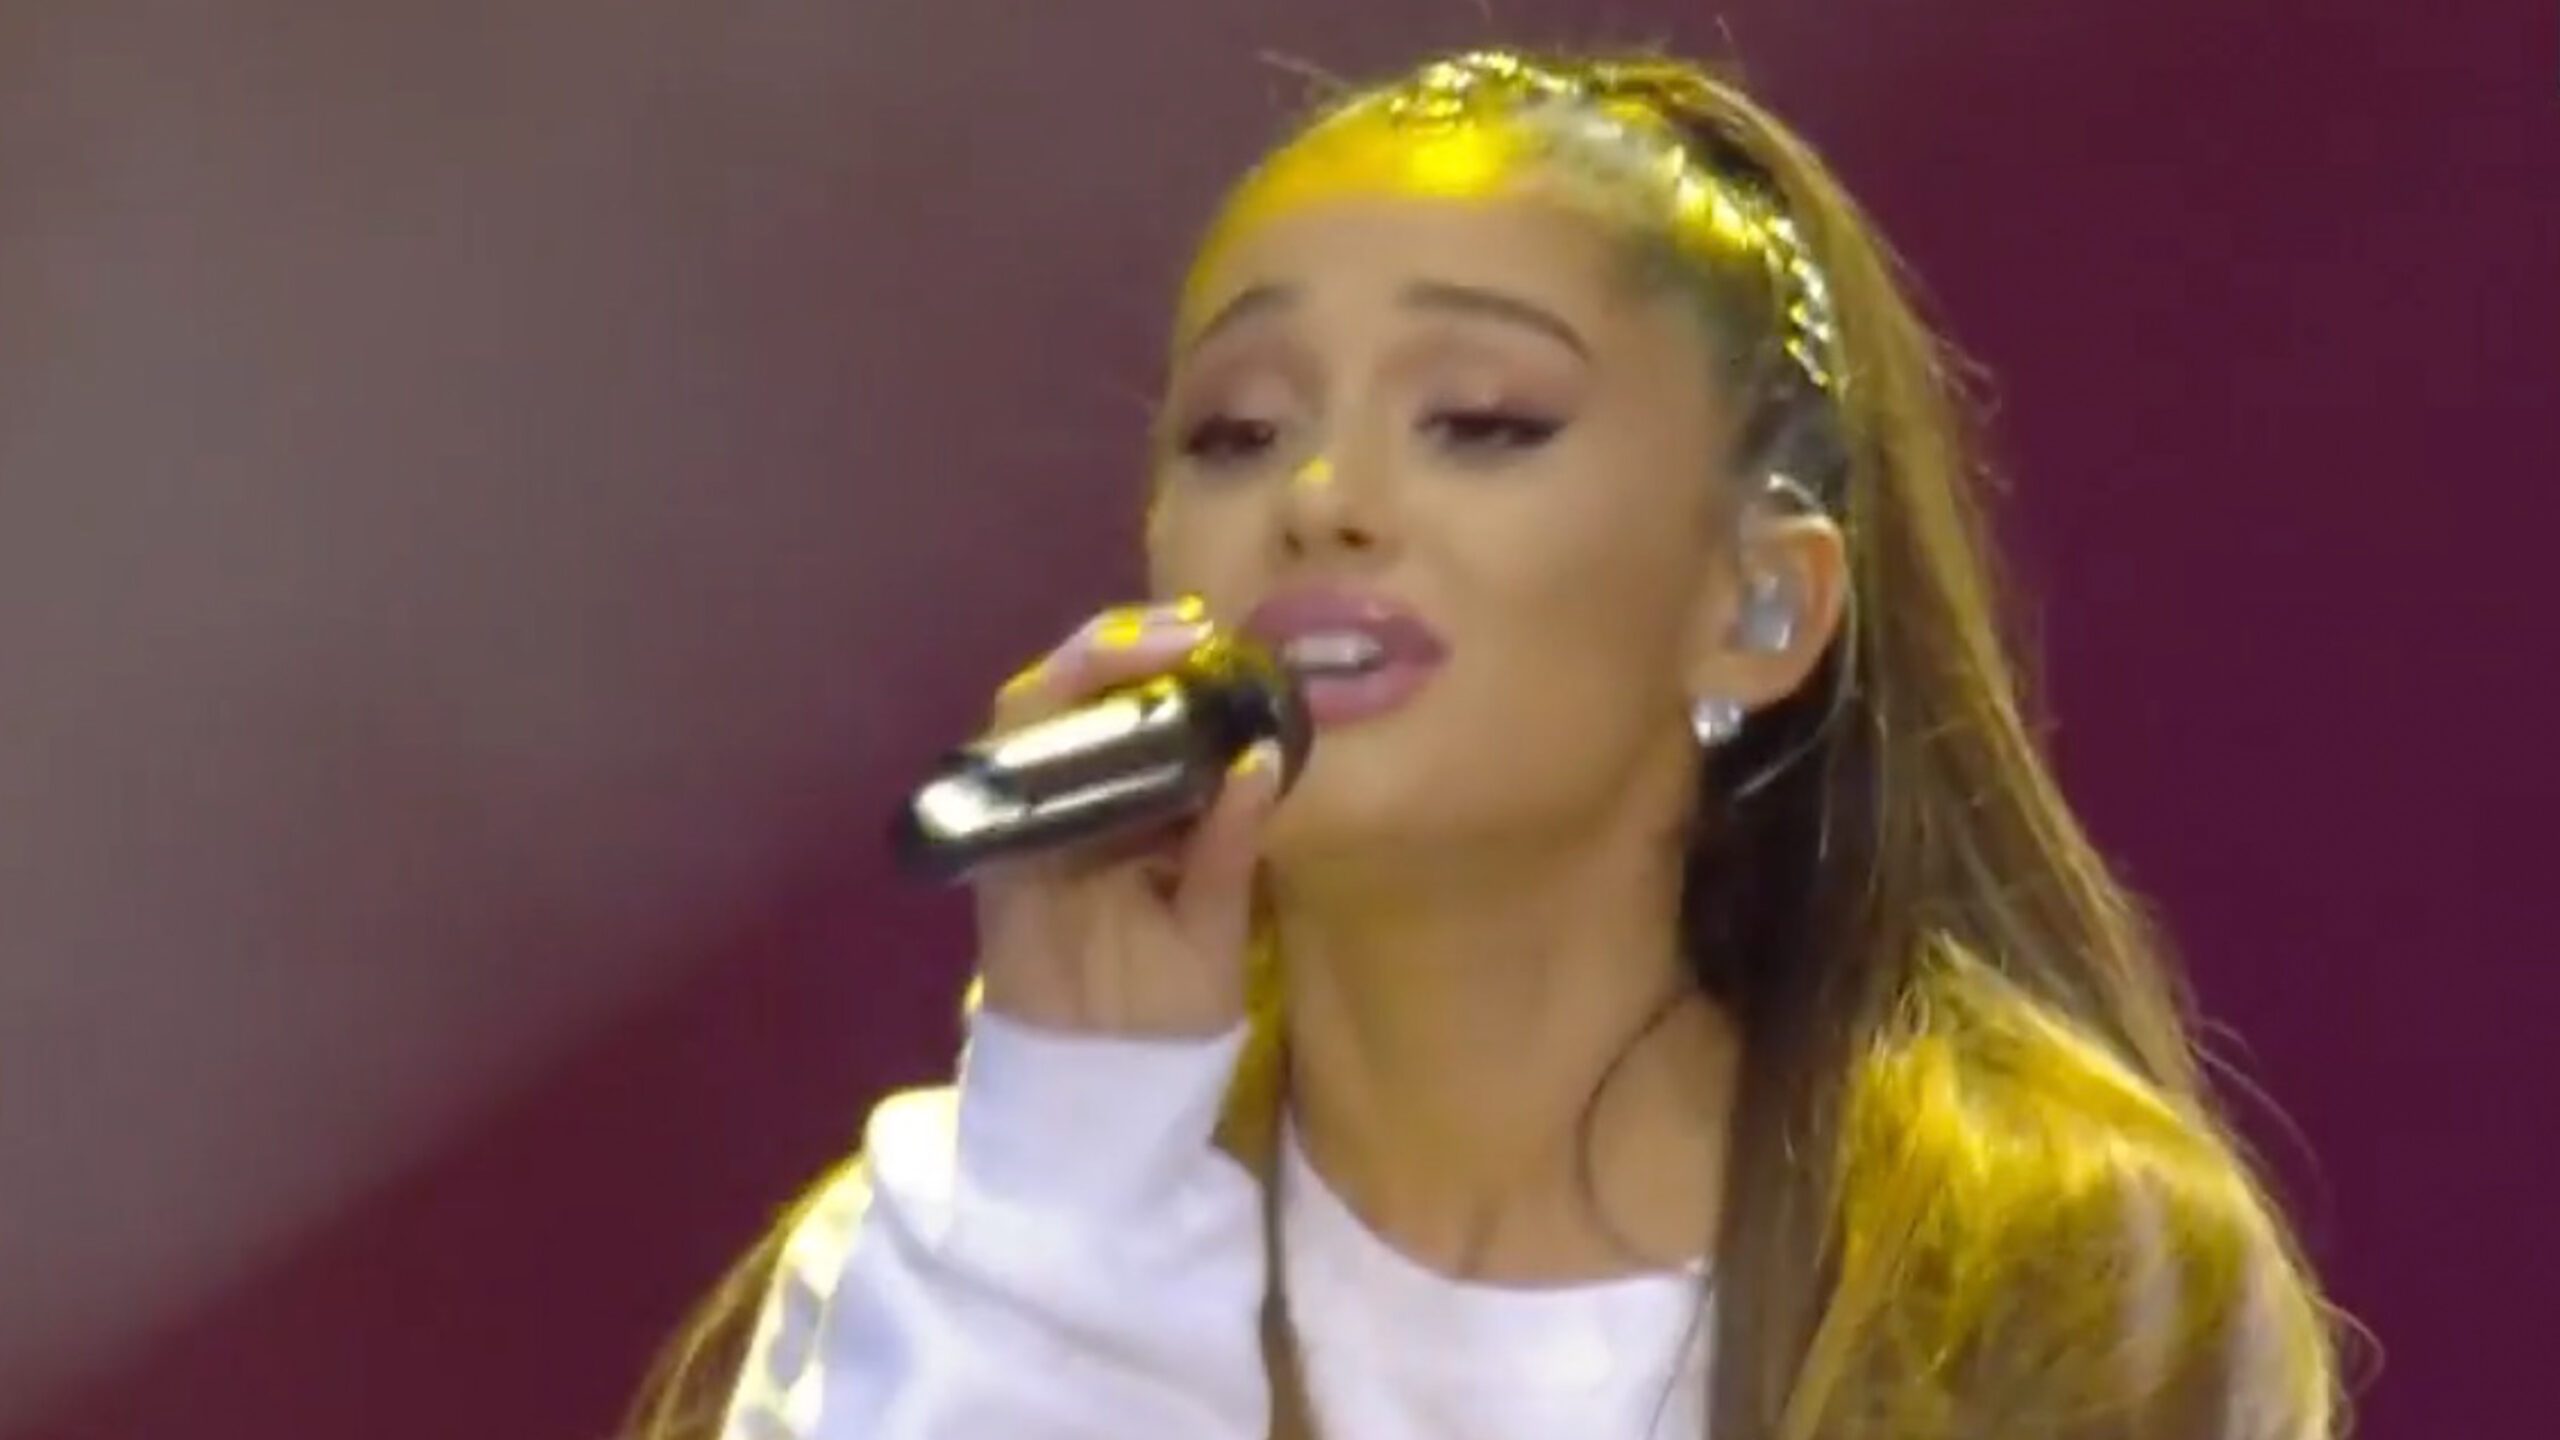 Ariana Grande to receive honorary citizenship from Manchester